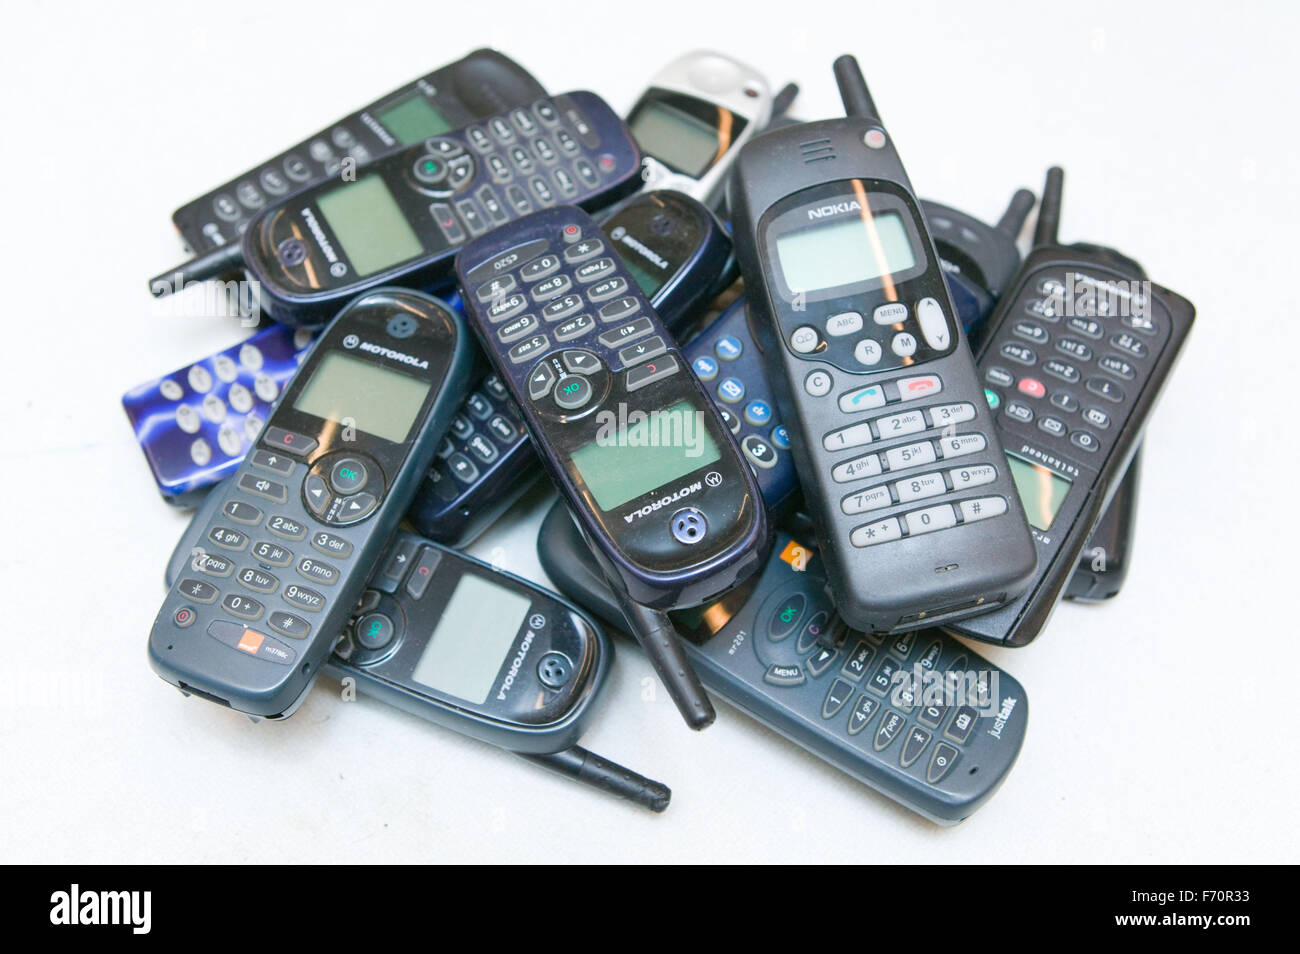 Pile of old mobile phones waiting to be recycled, Stock Photo